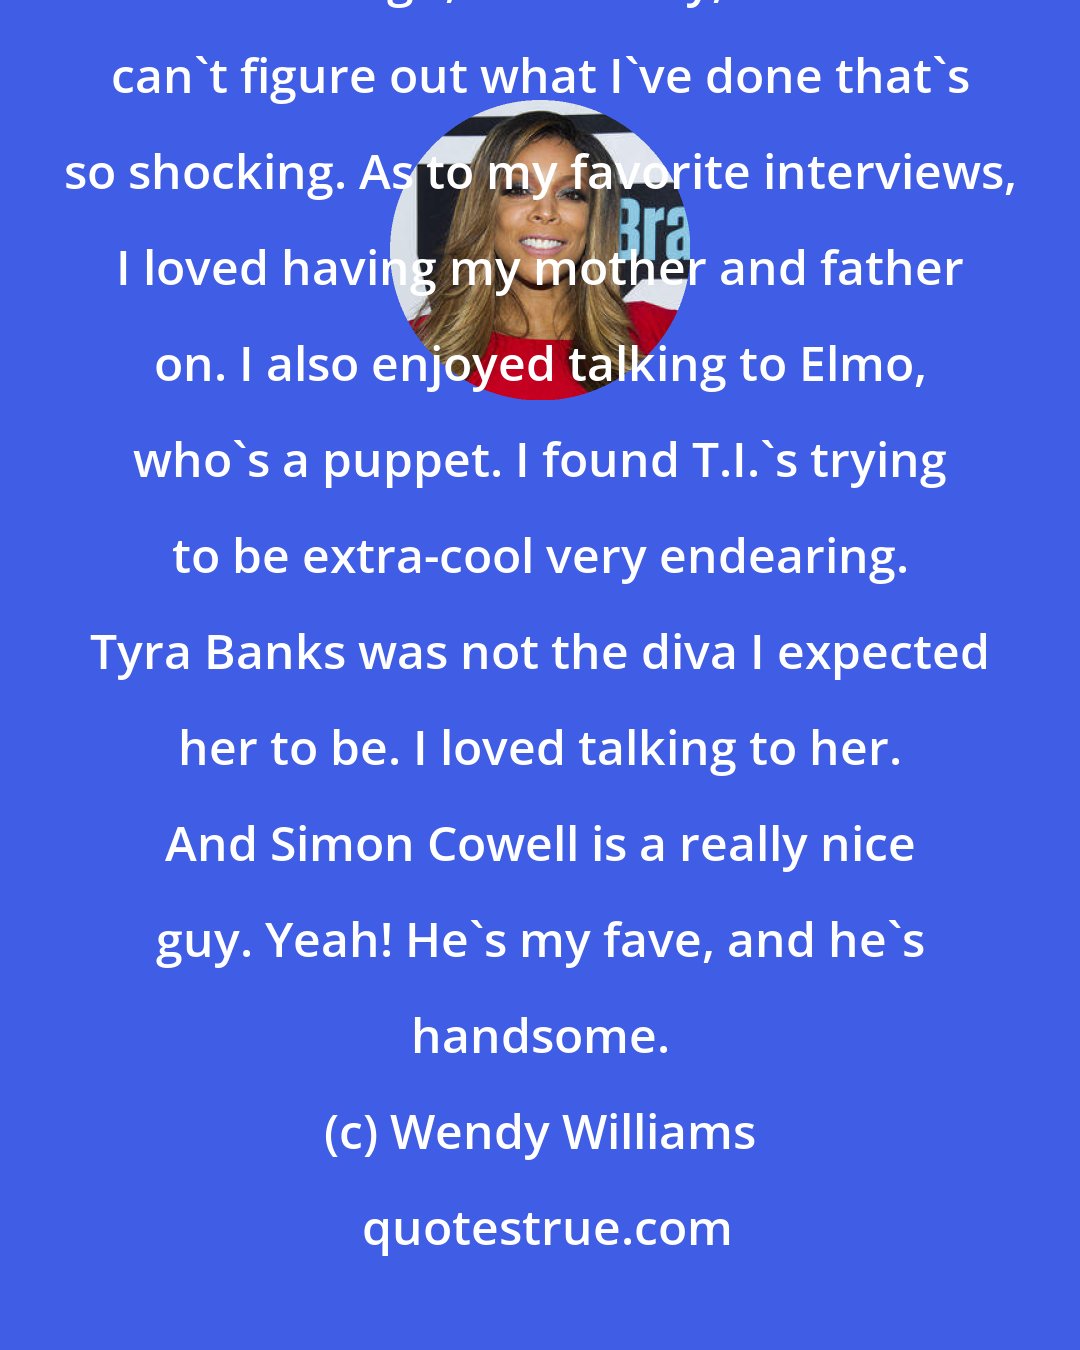 Wendy Williams: I enjoyed being what I was in radio, which some thought of as a shock jock although, to this day, I still can't figure out what I've done that's so shocking. As to my favorite interviews, I loved having my mother and father on. I also enjoyed talking to Elmo, who's a puppet. I found T.I.'s trying to be extra-cool very endearing. Tyra Banks was not the diva I expected her to be. I loved talking to her. And Simon Cowell is a really nice guy. Yeah! He's my fave, and he's handsome.